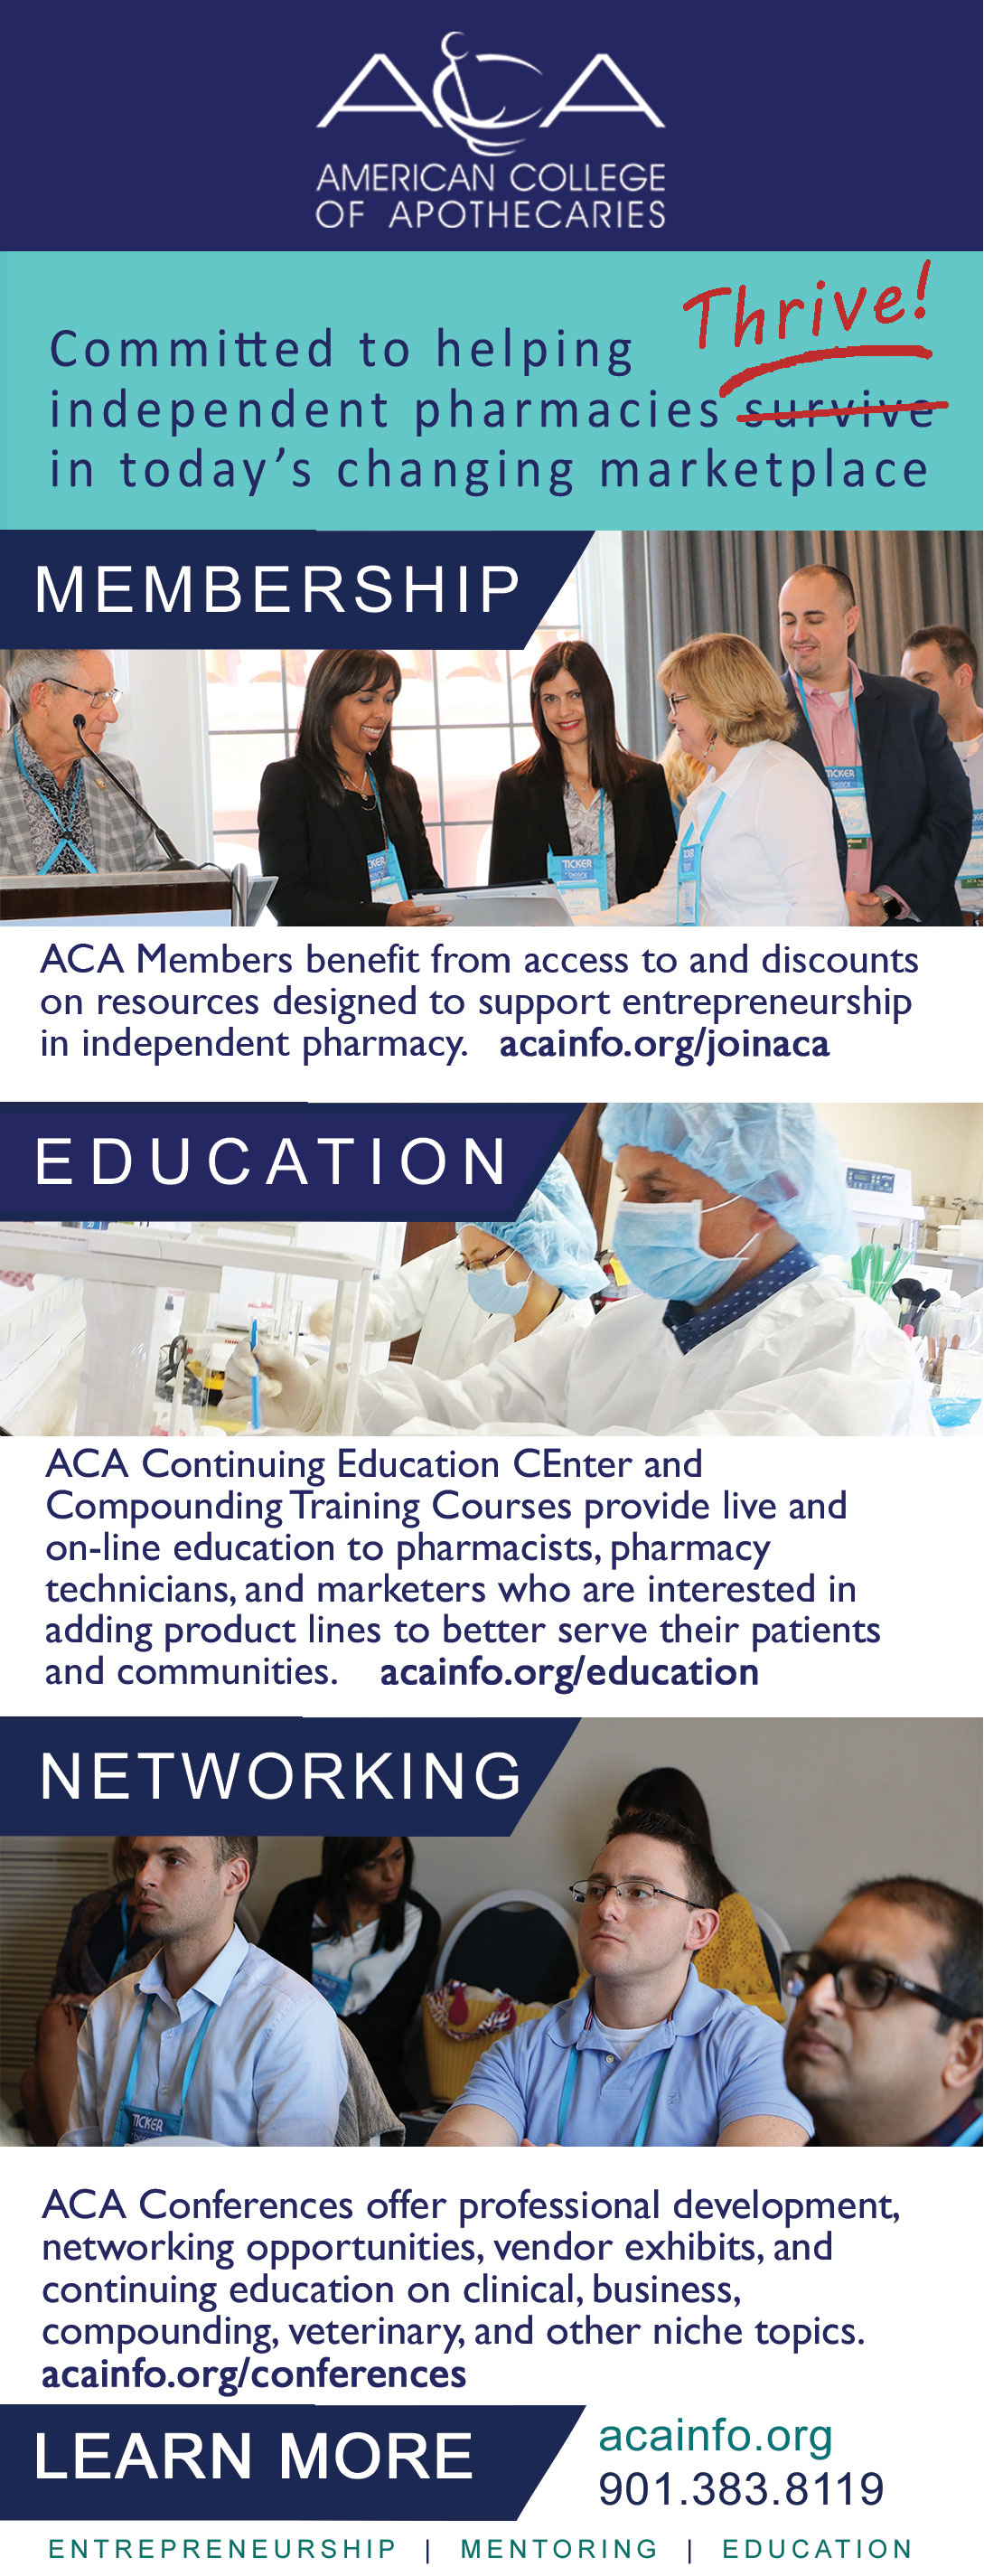 American College of Apothecaries (ACA)